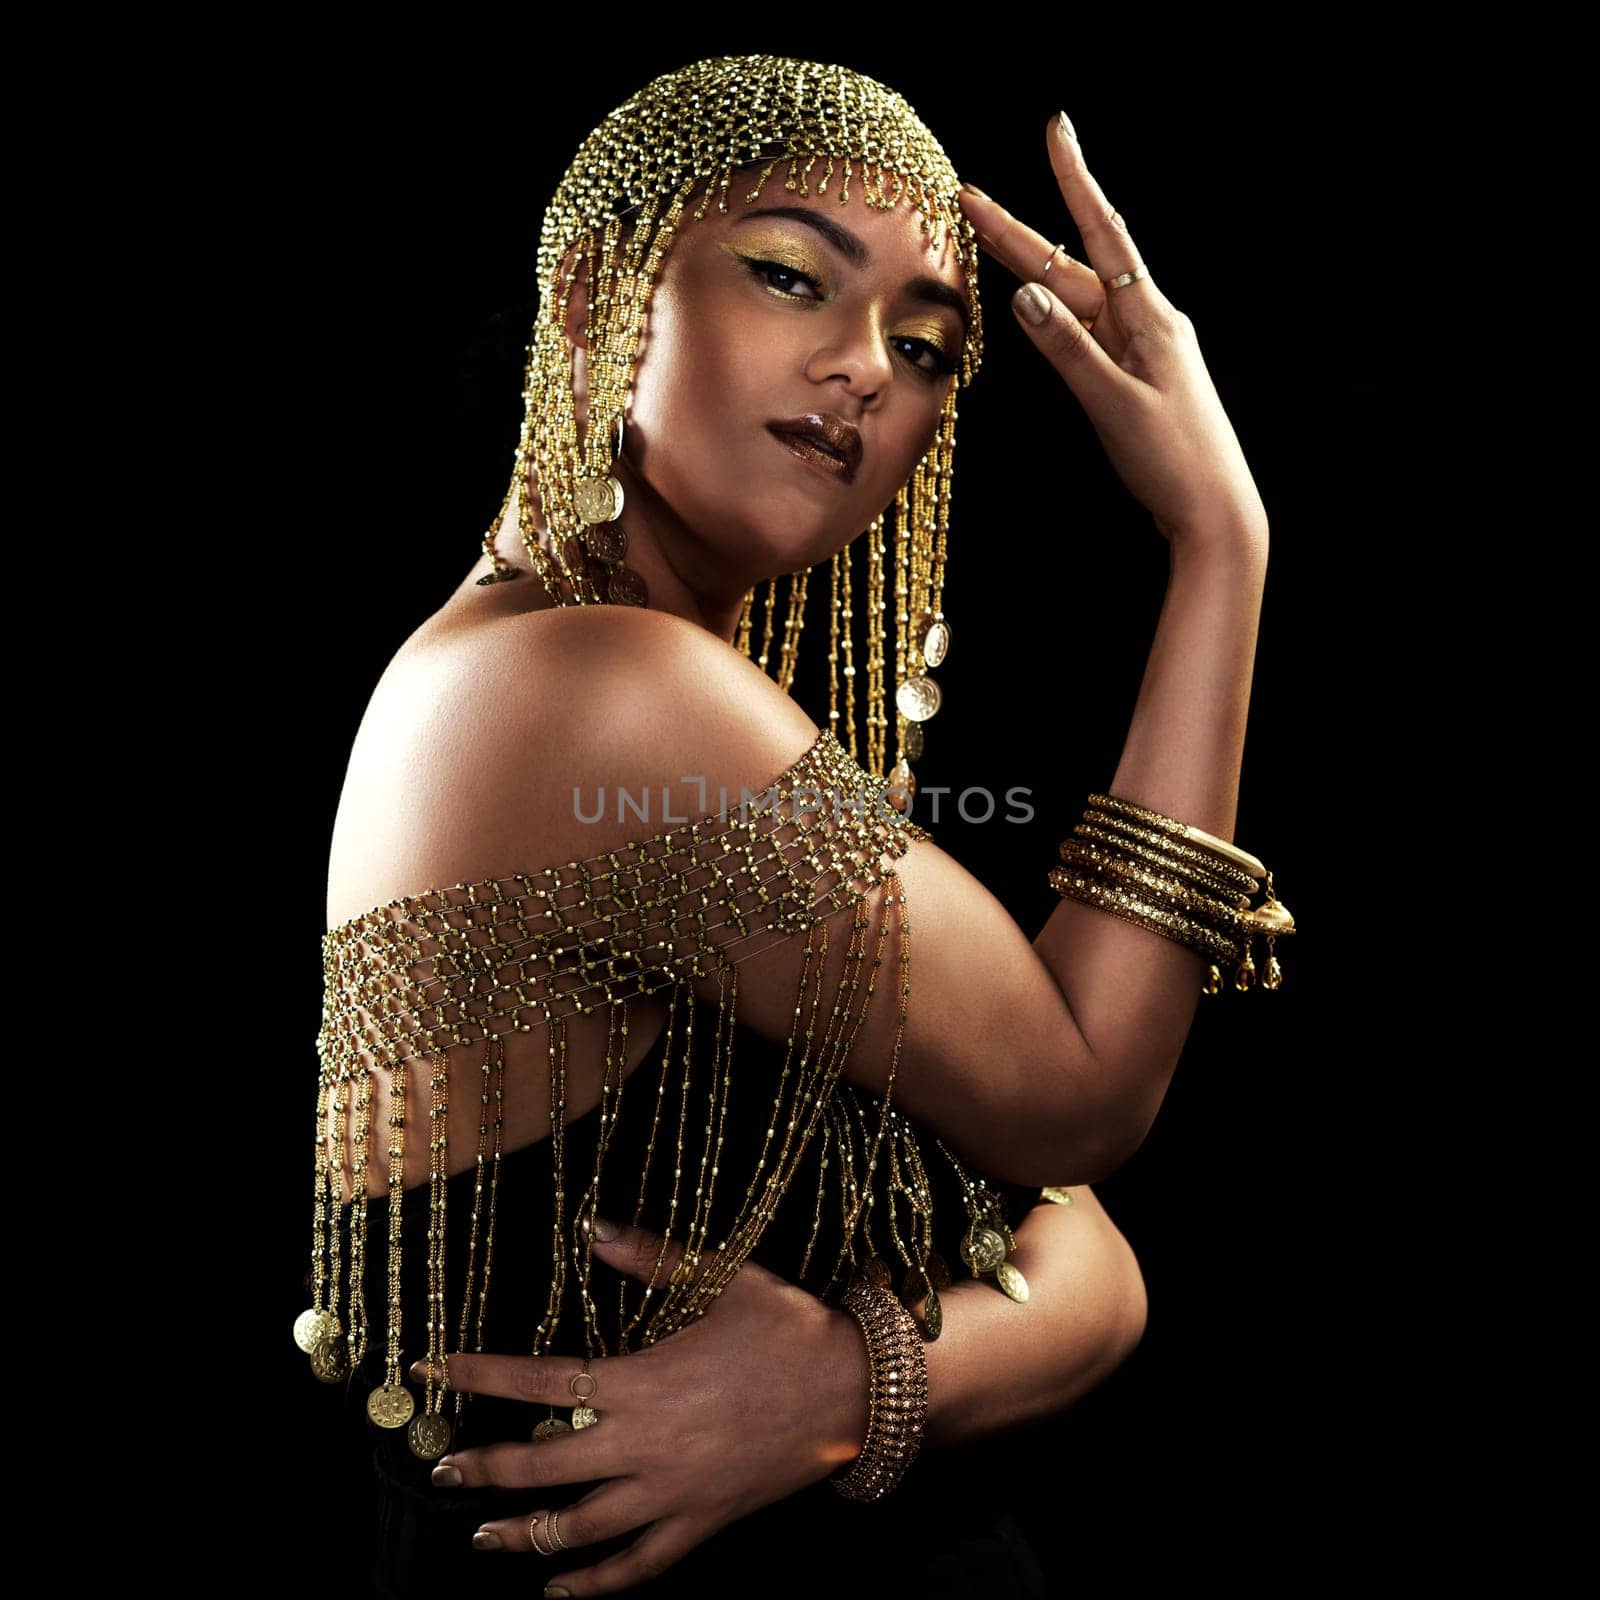 African woman, portrait and gold fashion with beauty and cosmetics in a studio. Isolated, black background and young female face with crown, Egypt jewelry and culture empowerment with queen pride.